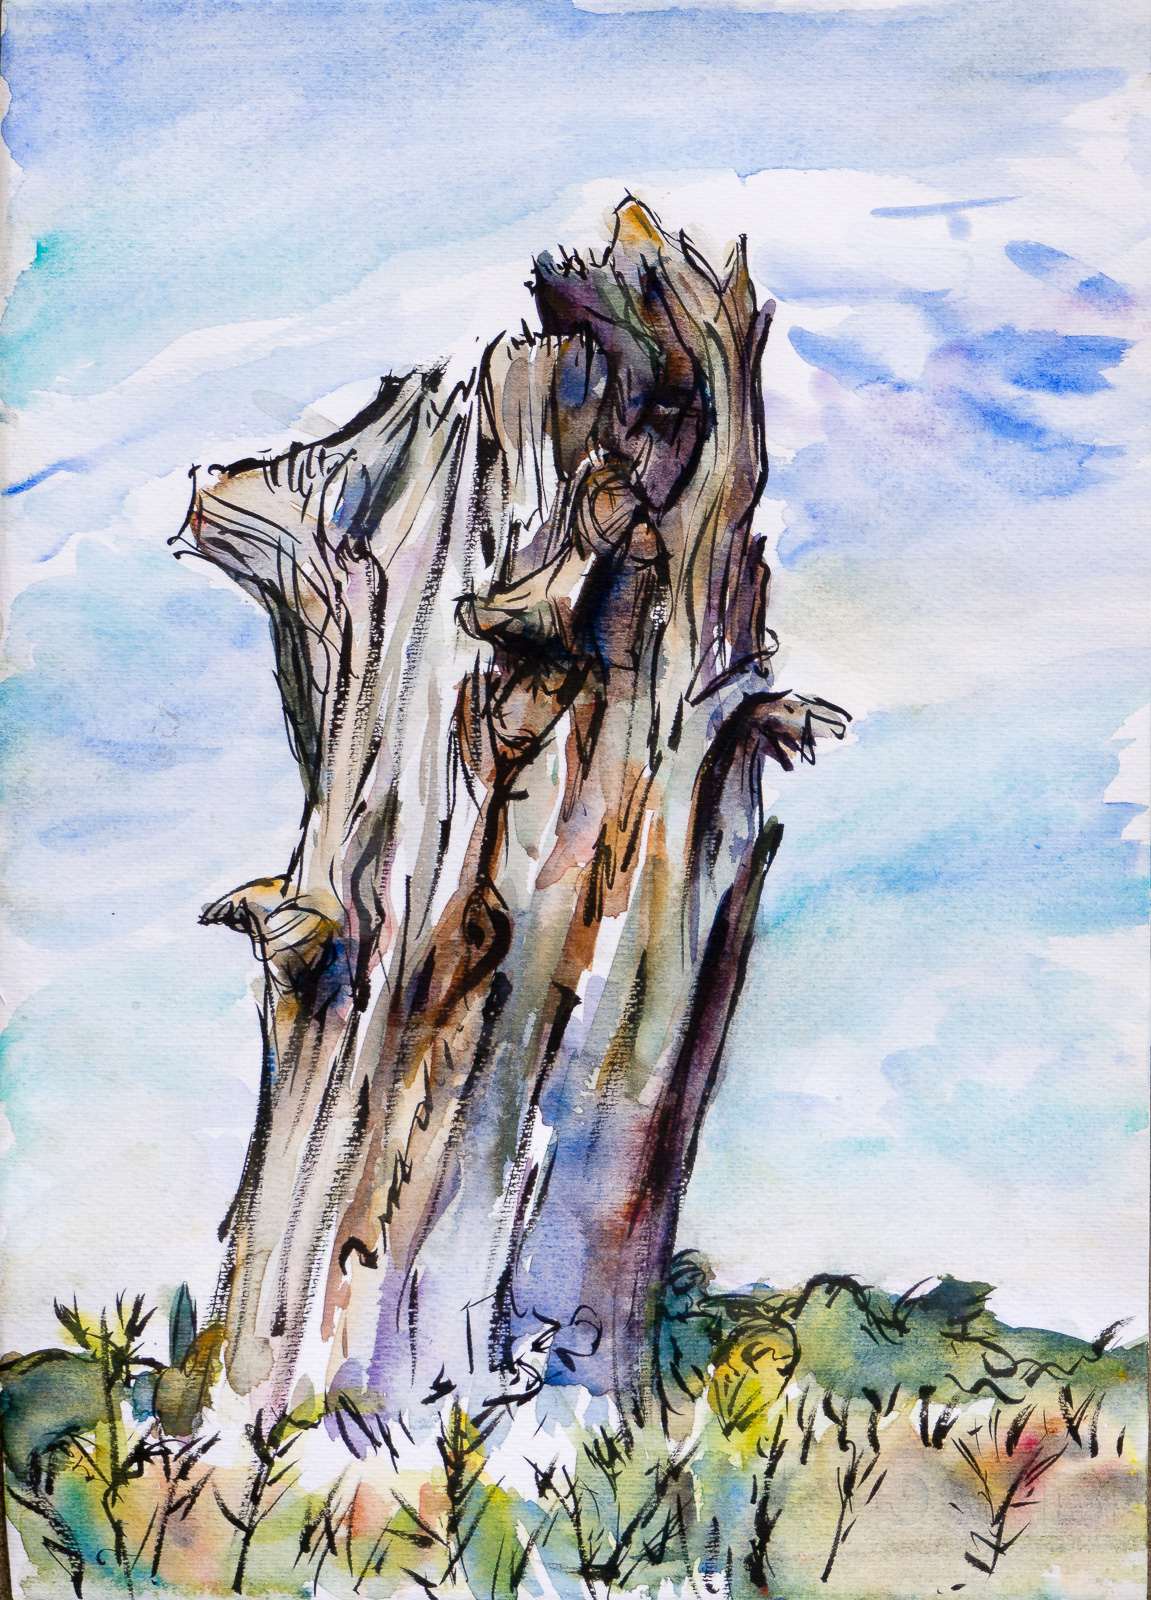 Ferns and Blue Sky - final (Dead Tree Series), Kuretake Brush Pen and watercolour, 25x35.5cm, Fabriano F5 paper.